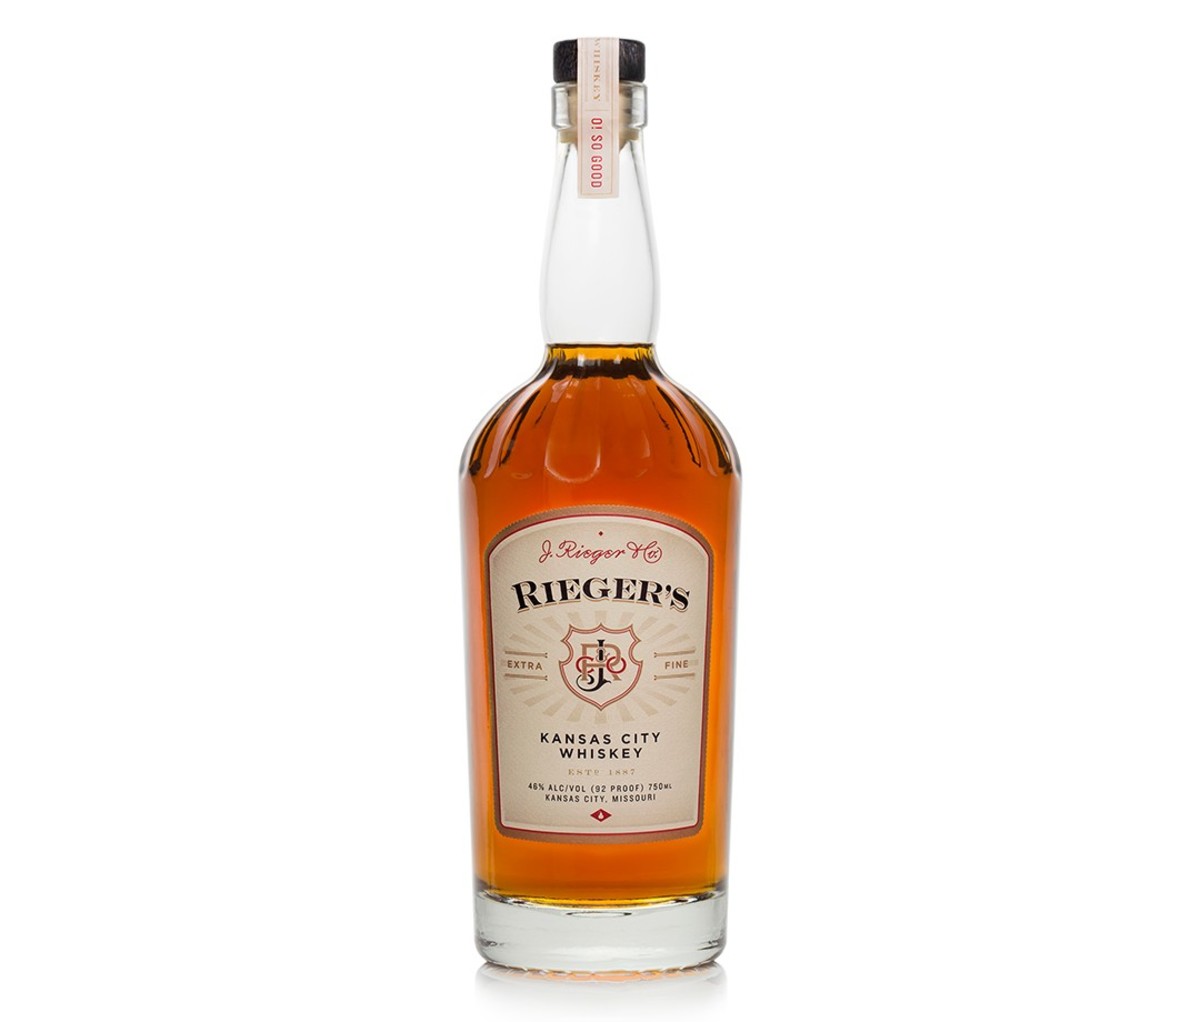 A bottle of Rieger’s Kansas City Whiskey